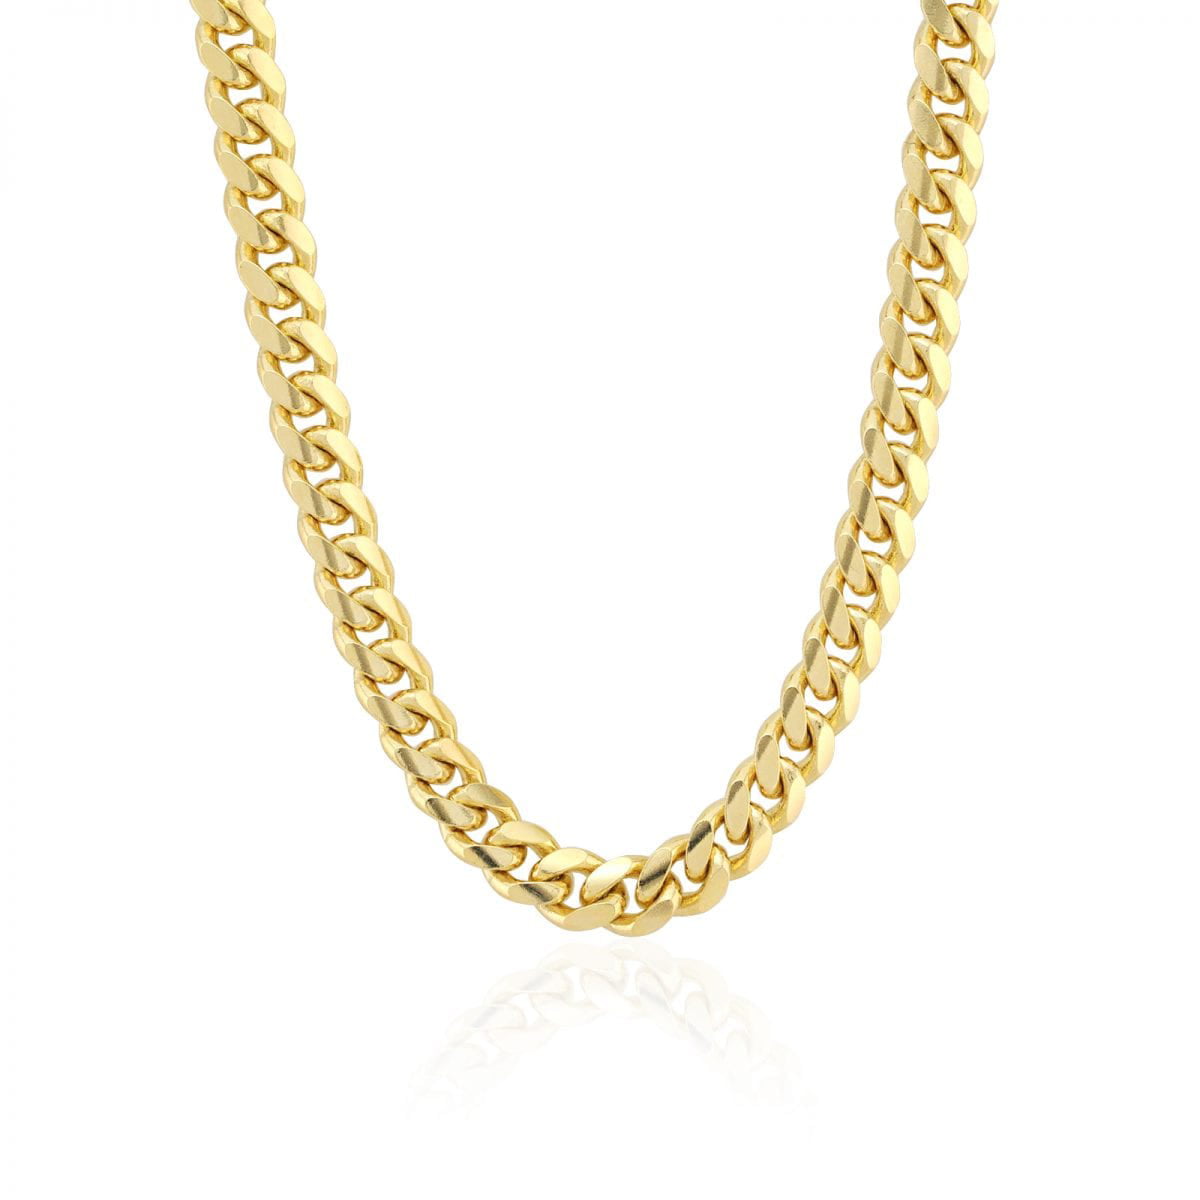 Real 14K Gold Rope Chain and Cross pendant in 18",20",22",24" & 30inch Italian